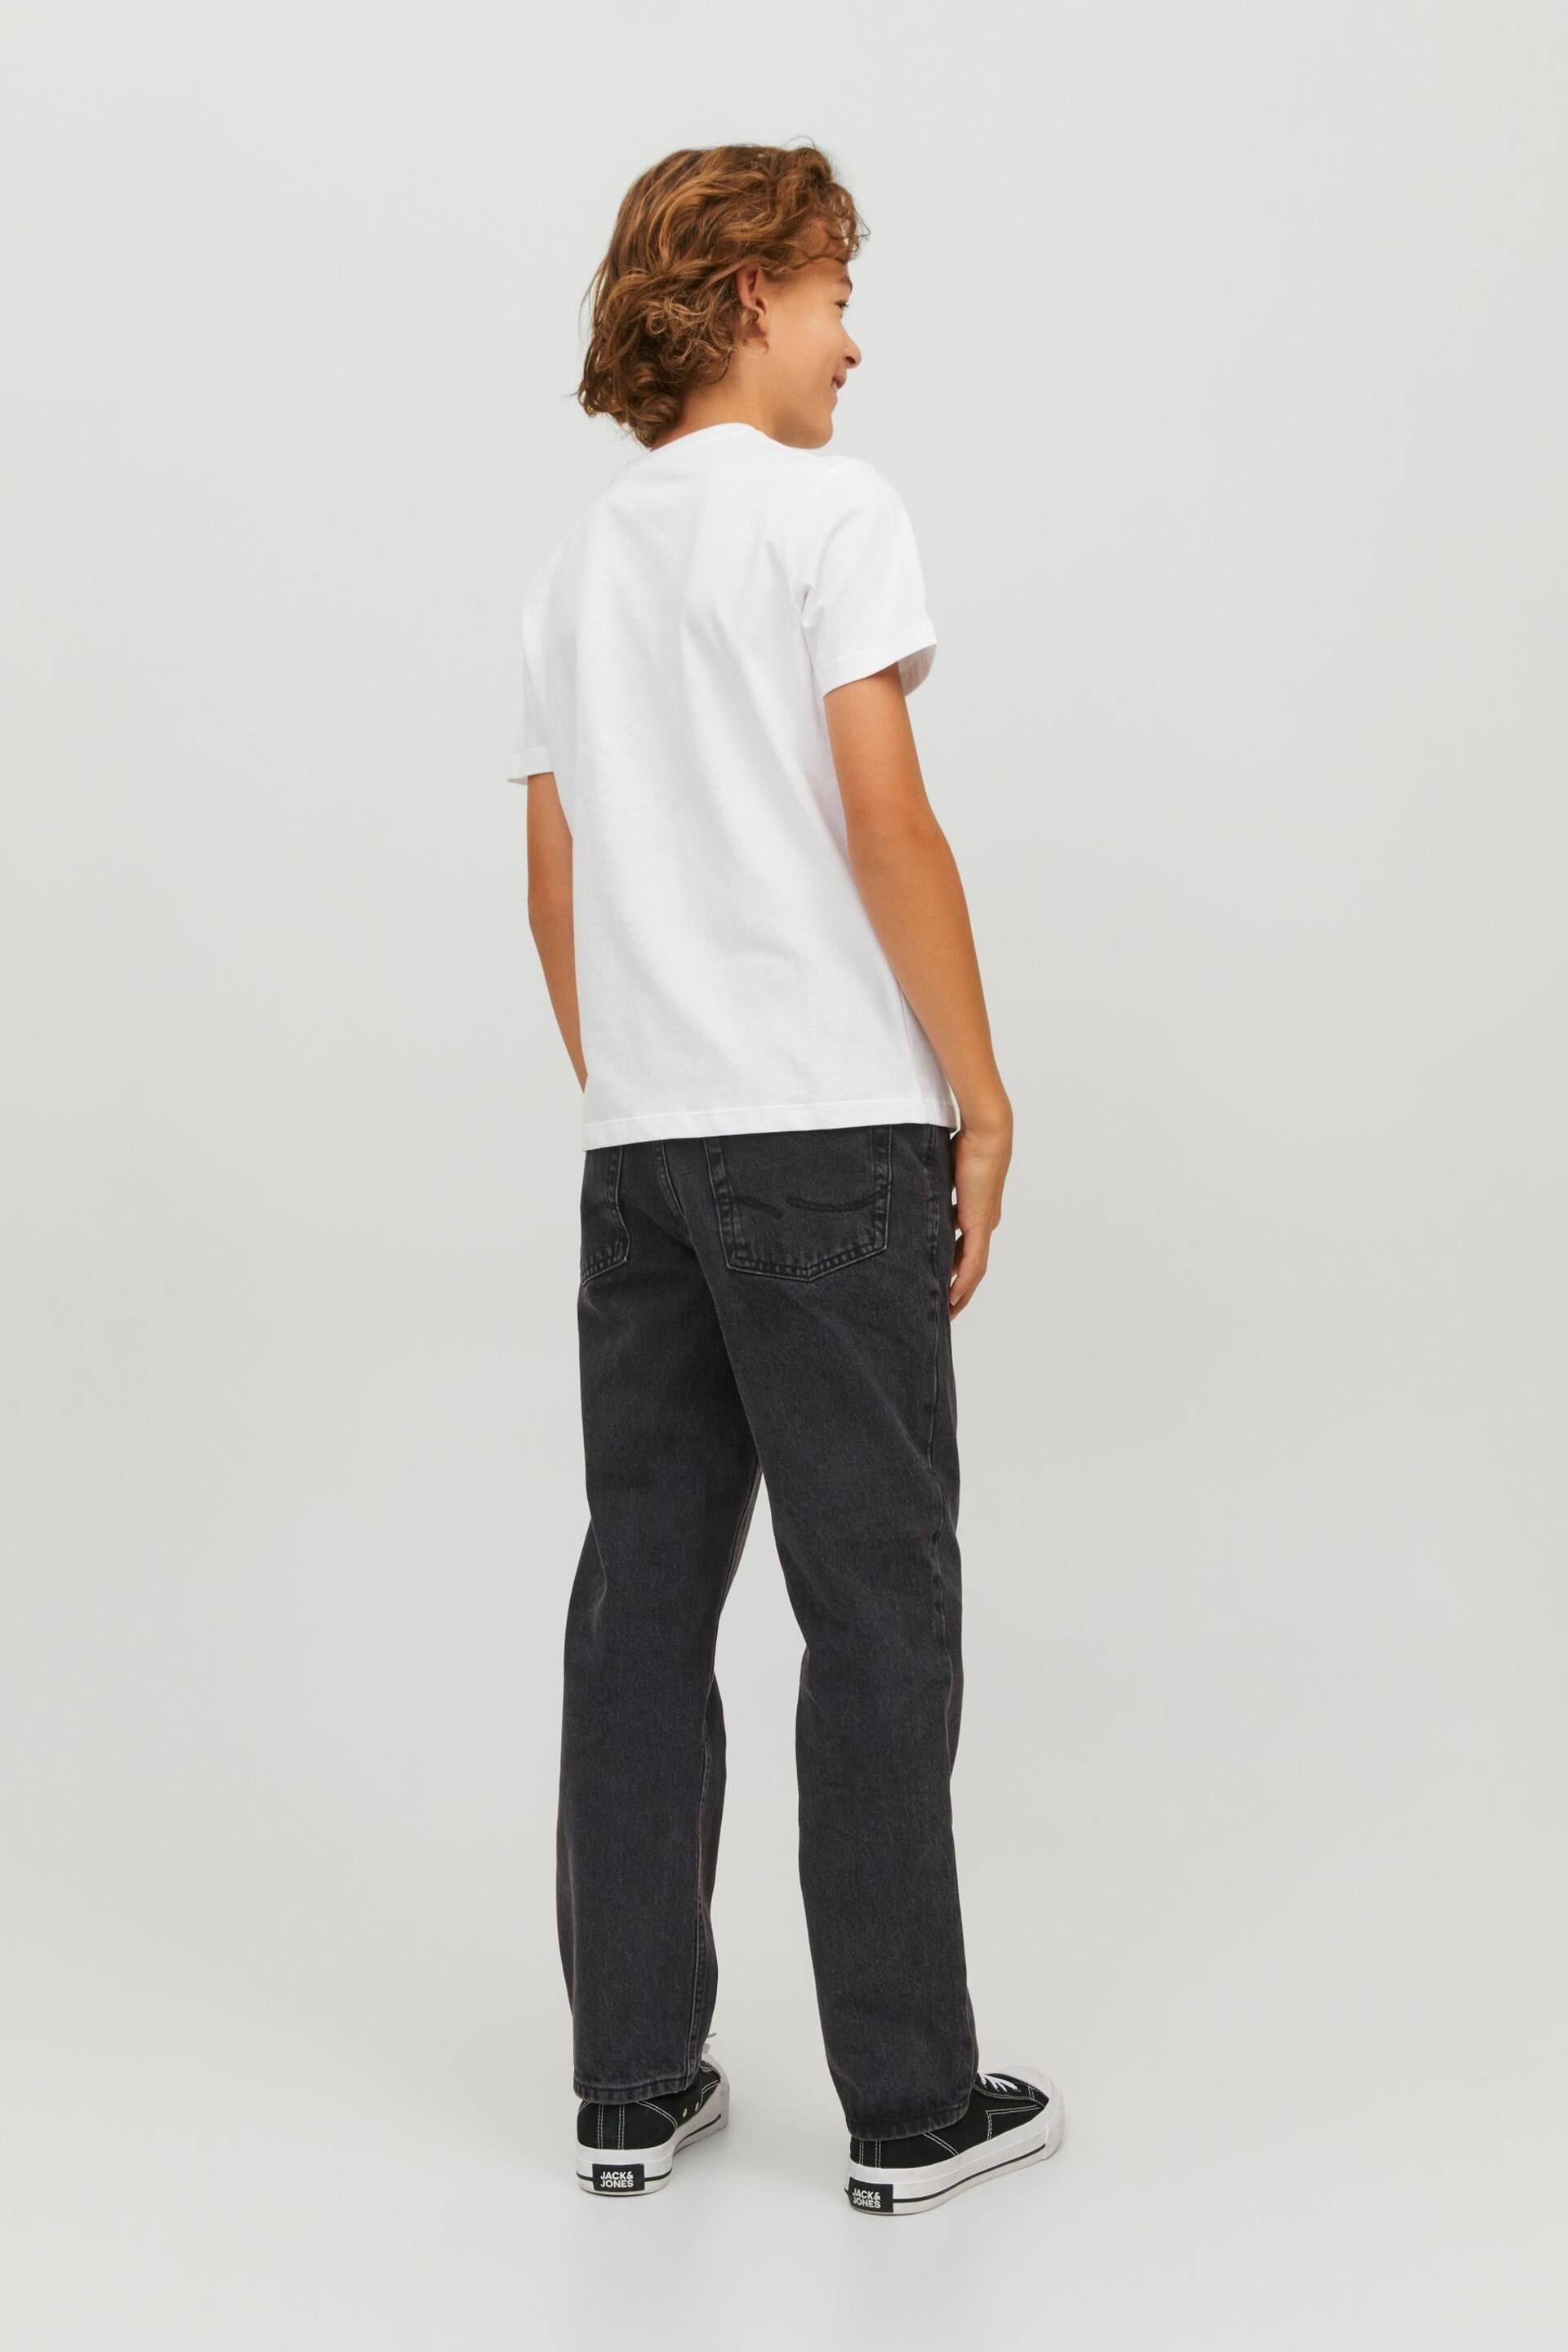 JACK & JONES Black Relaxed Fit Stretch Jeans - Image 2 of 6